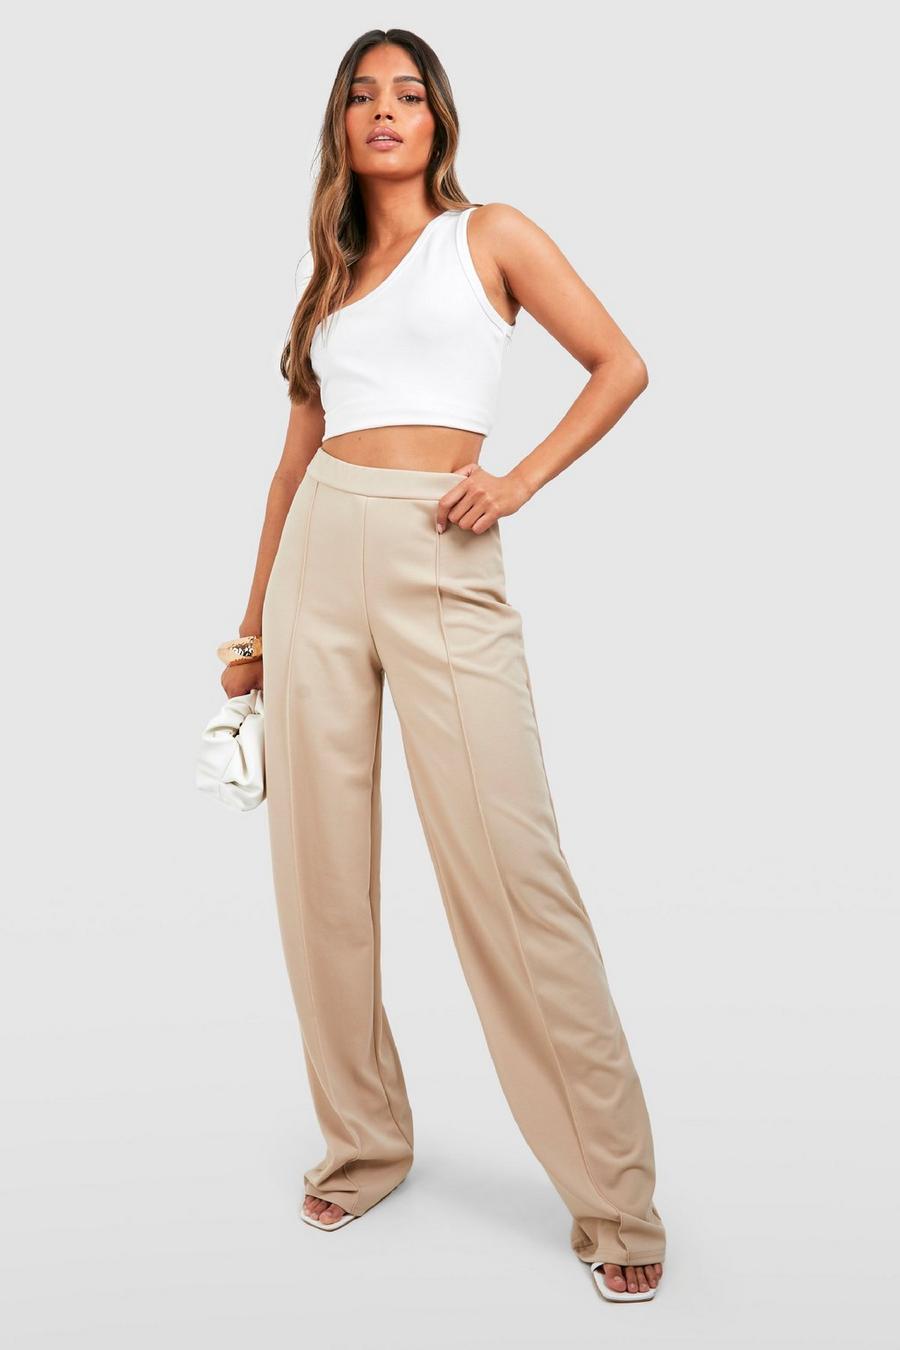 Together Side Bow Detail Cream Trousers Size 16 BNWT 